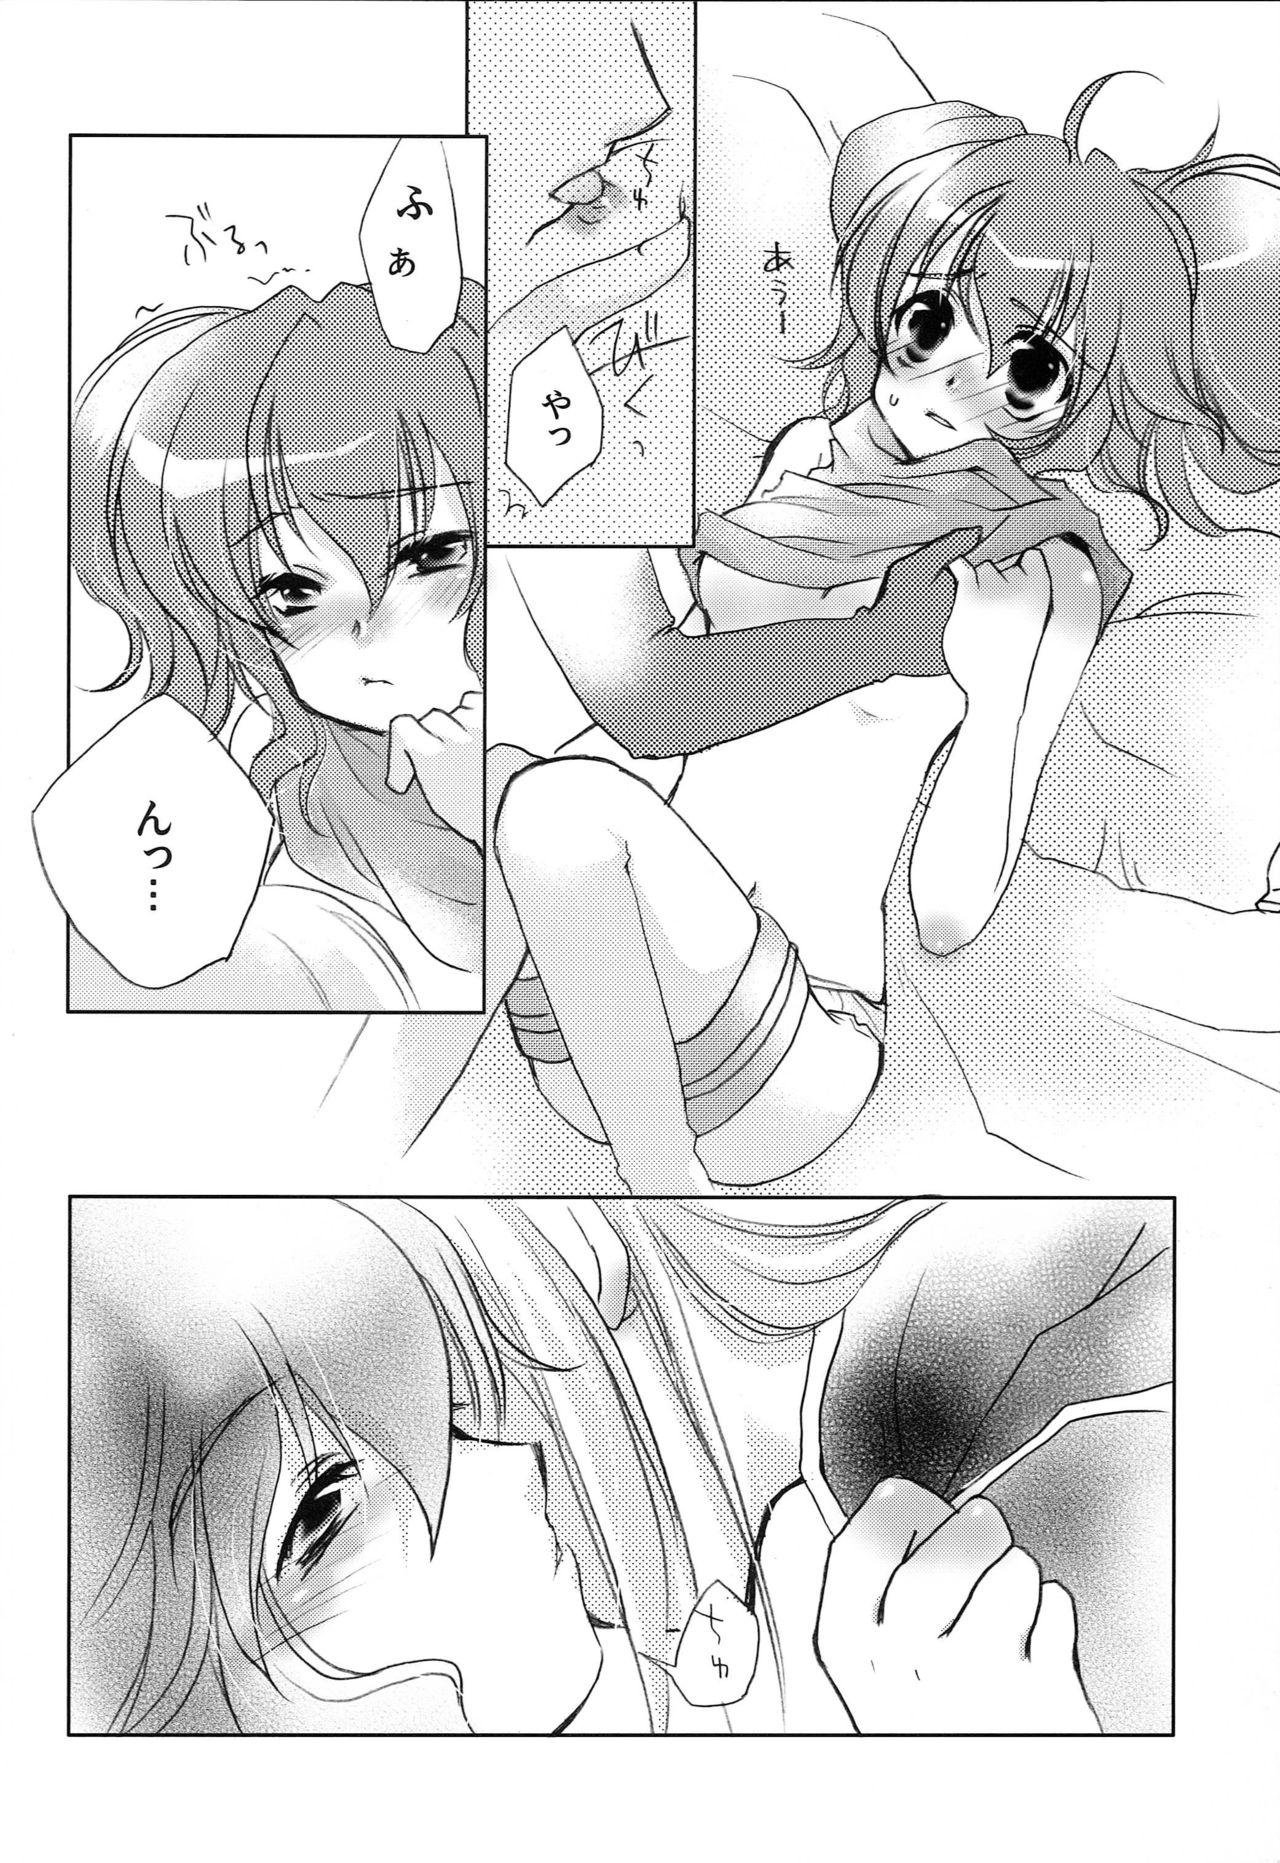 First Carnation, Lily, Lily, Rose - Tales of the abyss Hot Couple Sex - Page 9